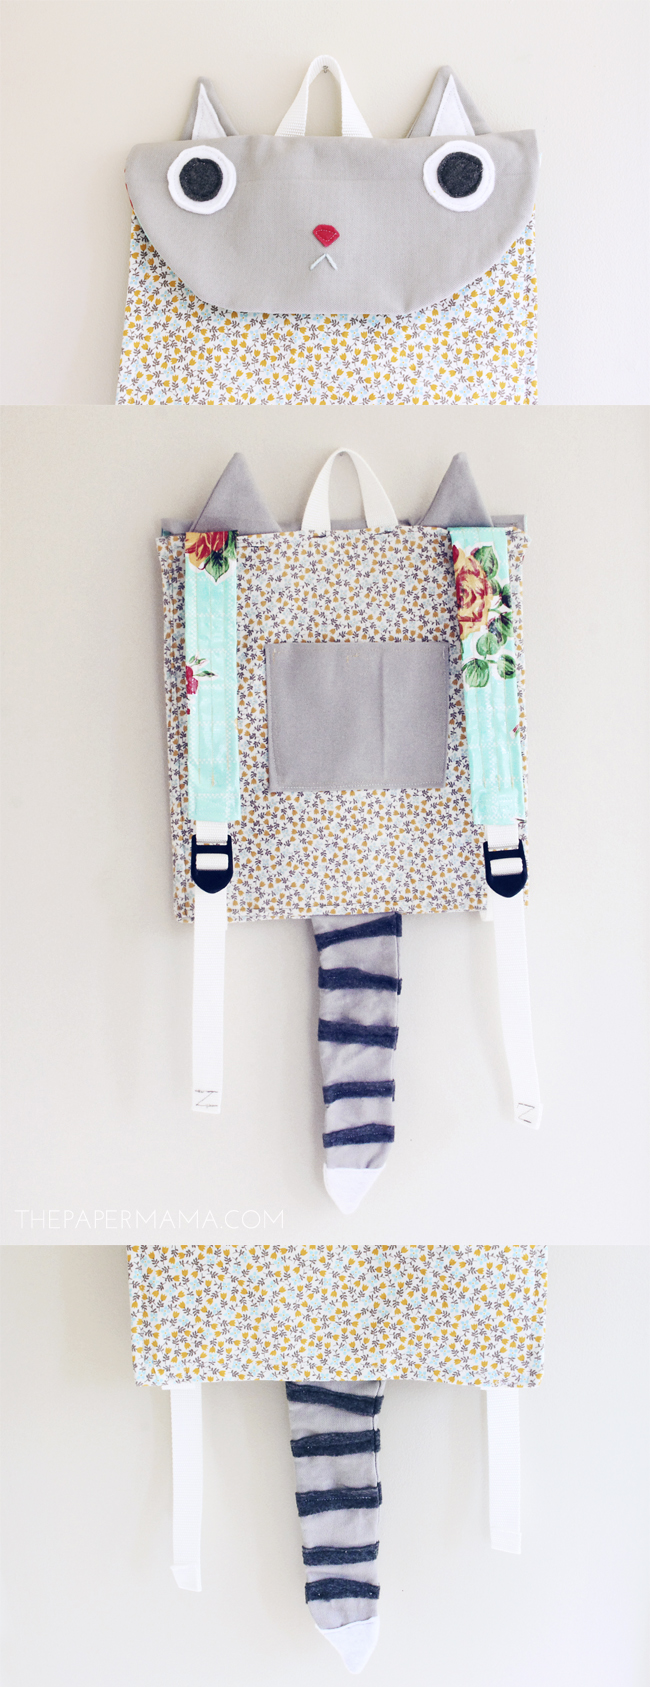 My Little Kitty Backpack // thepapermama.com